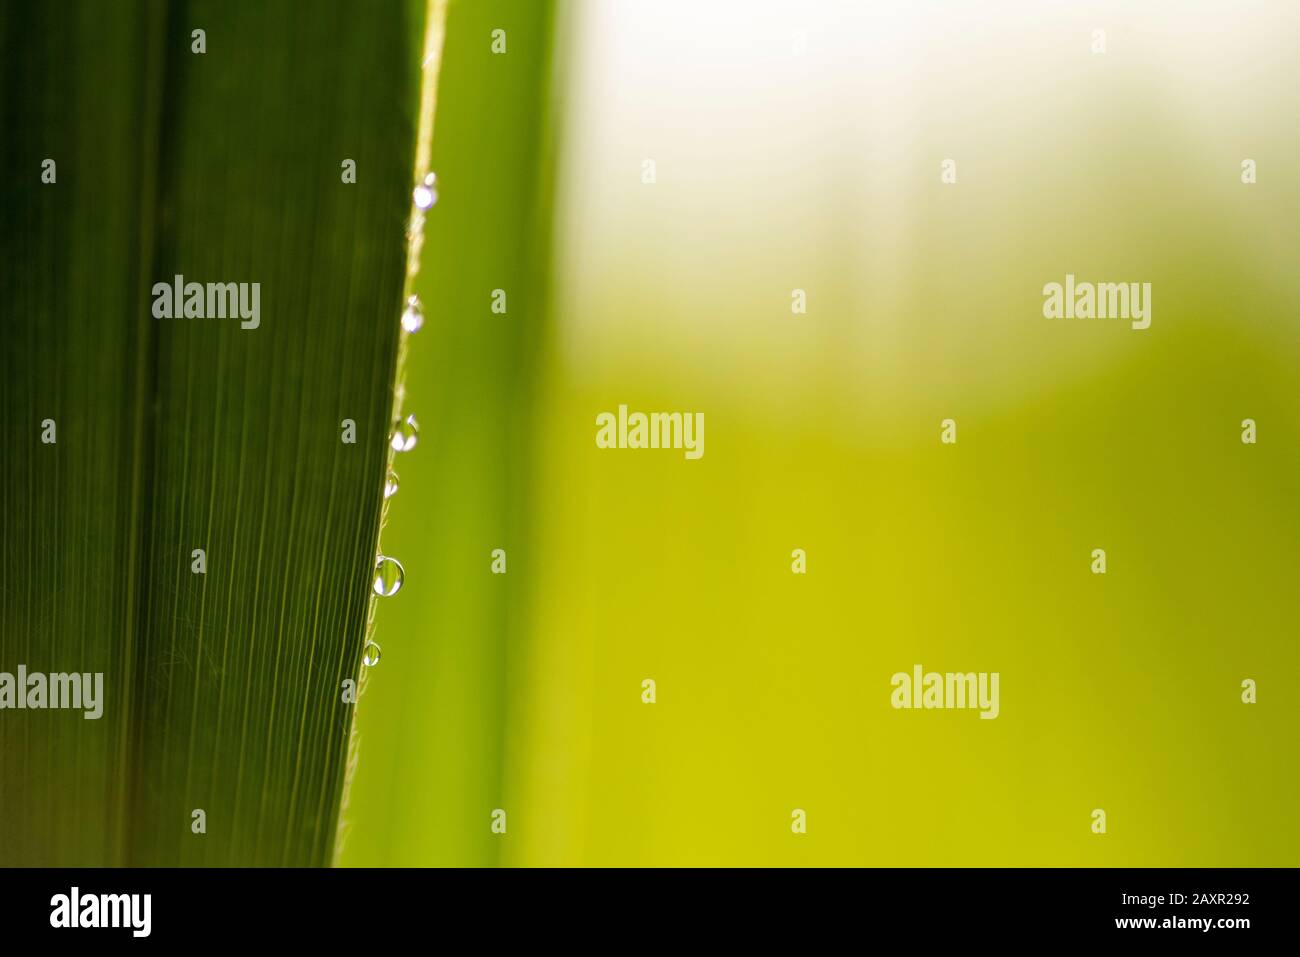 Dew drops on a reed stalk, in the background blurred green Stock Photo